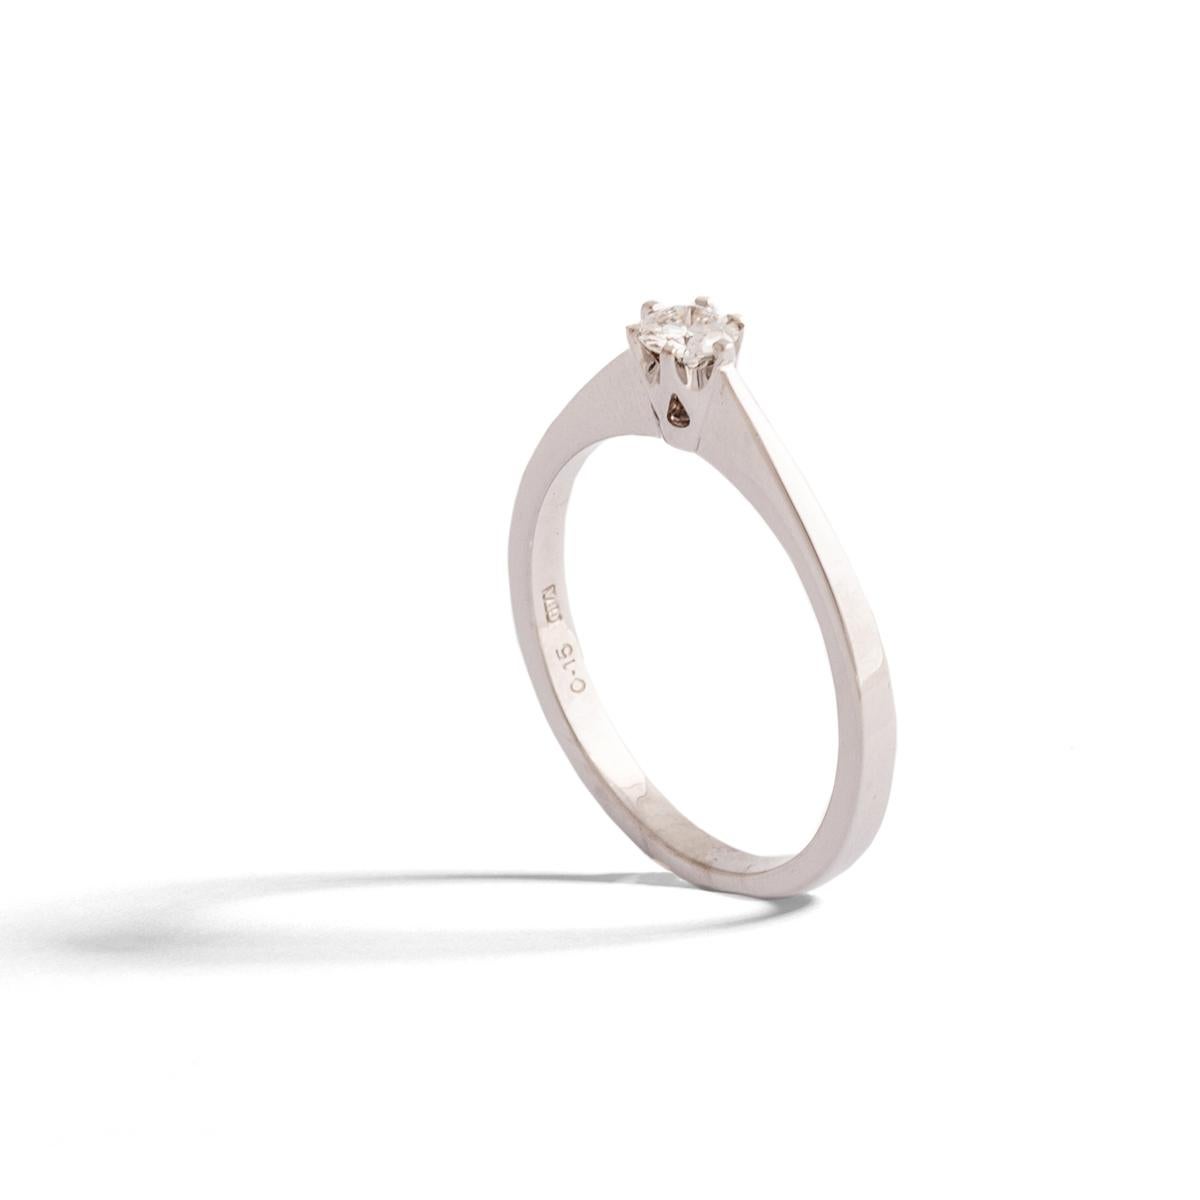 Solitaire round cut Diamond on white gold Ring.
Diamond estimated weight: 0.20 carat.
Modern cut. Estimated to be G-H color and Vvs clarity.
Diamond diameter: approximately 3.72 millimeters.
Ring size: 6 1/2.
Gross weight: 2.63 grams.
